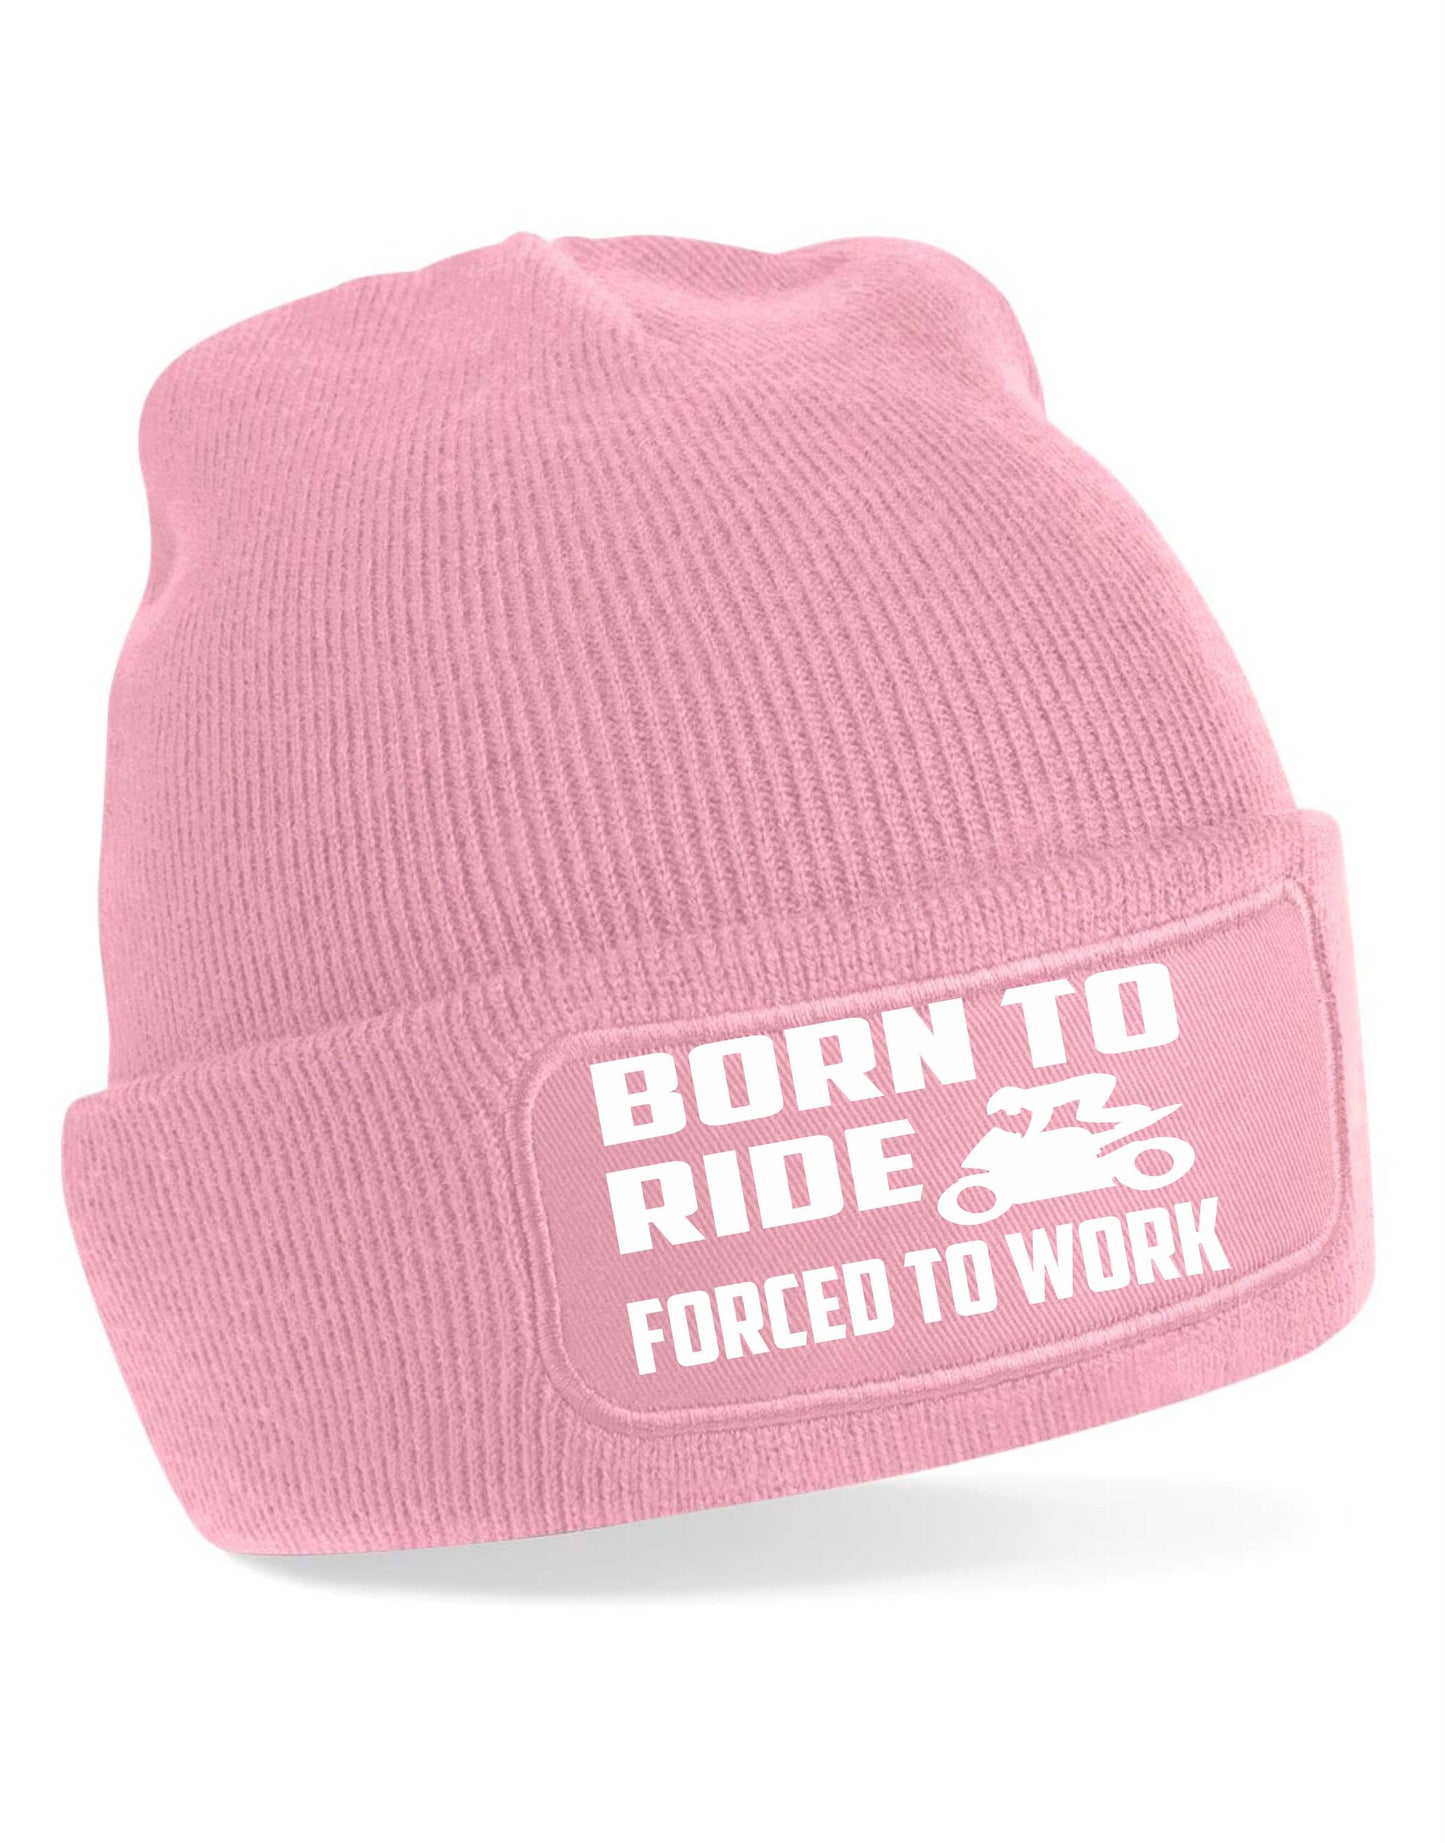 Born To Ride Forced To Work Beanie Hat Bikers For Men & Ladies